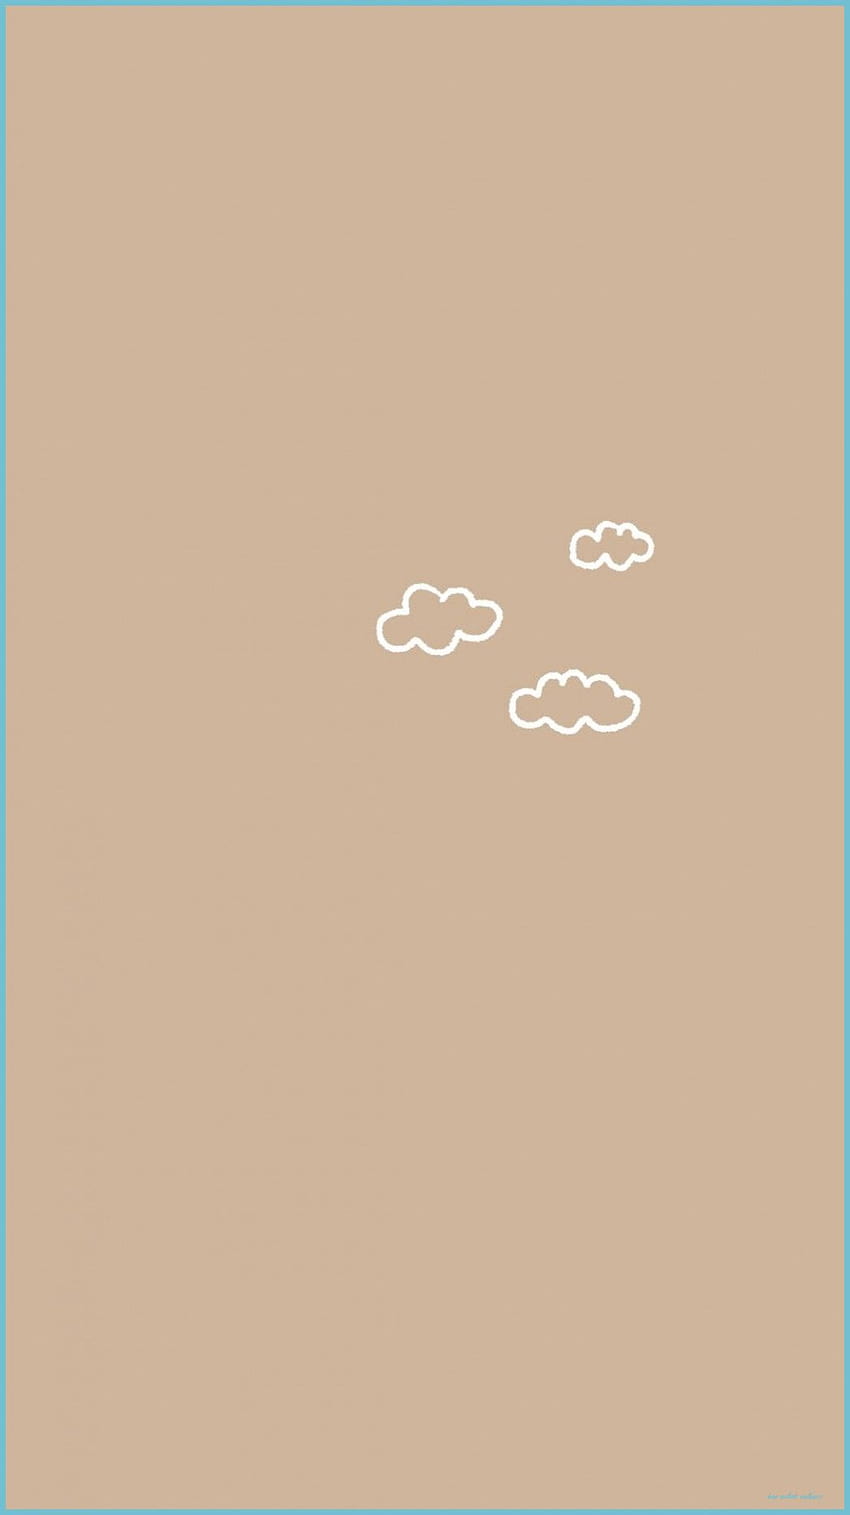 Beige Cartoon Minimalist Rainbow Mobile Phone Wallpaper Background Wallpaper  Image For Free Download  Pngtree